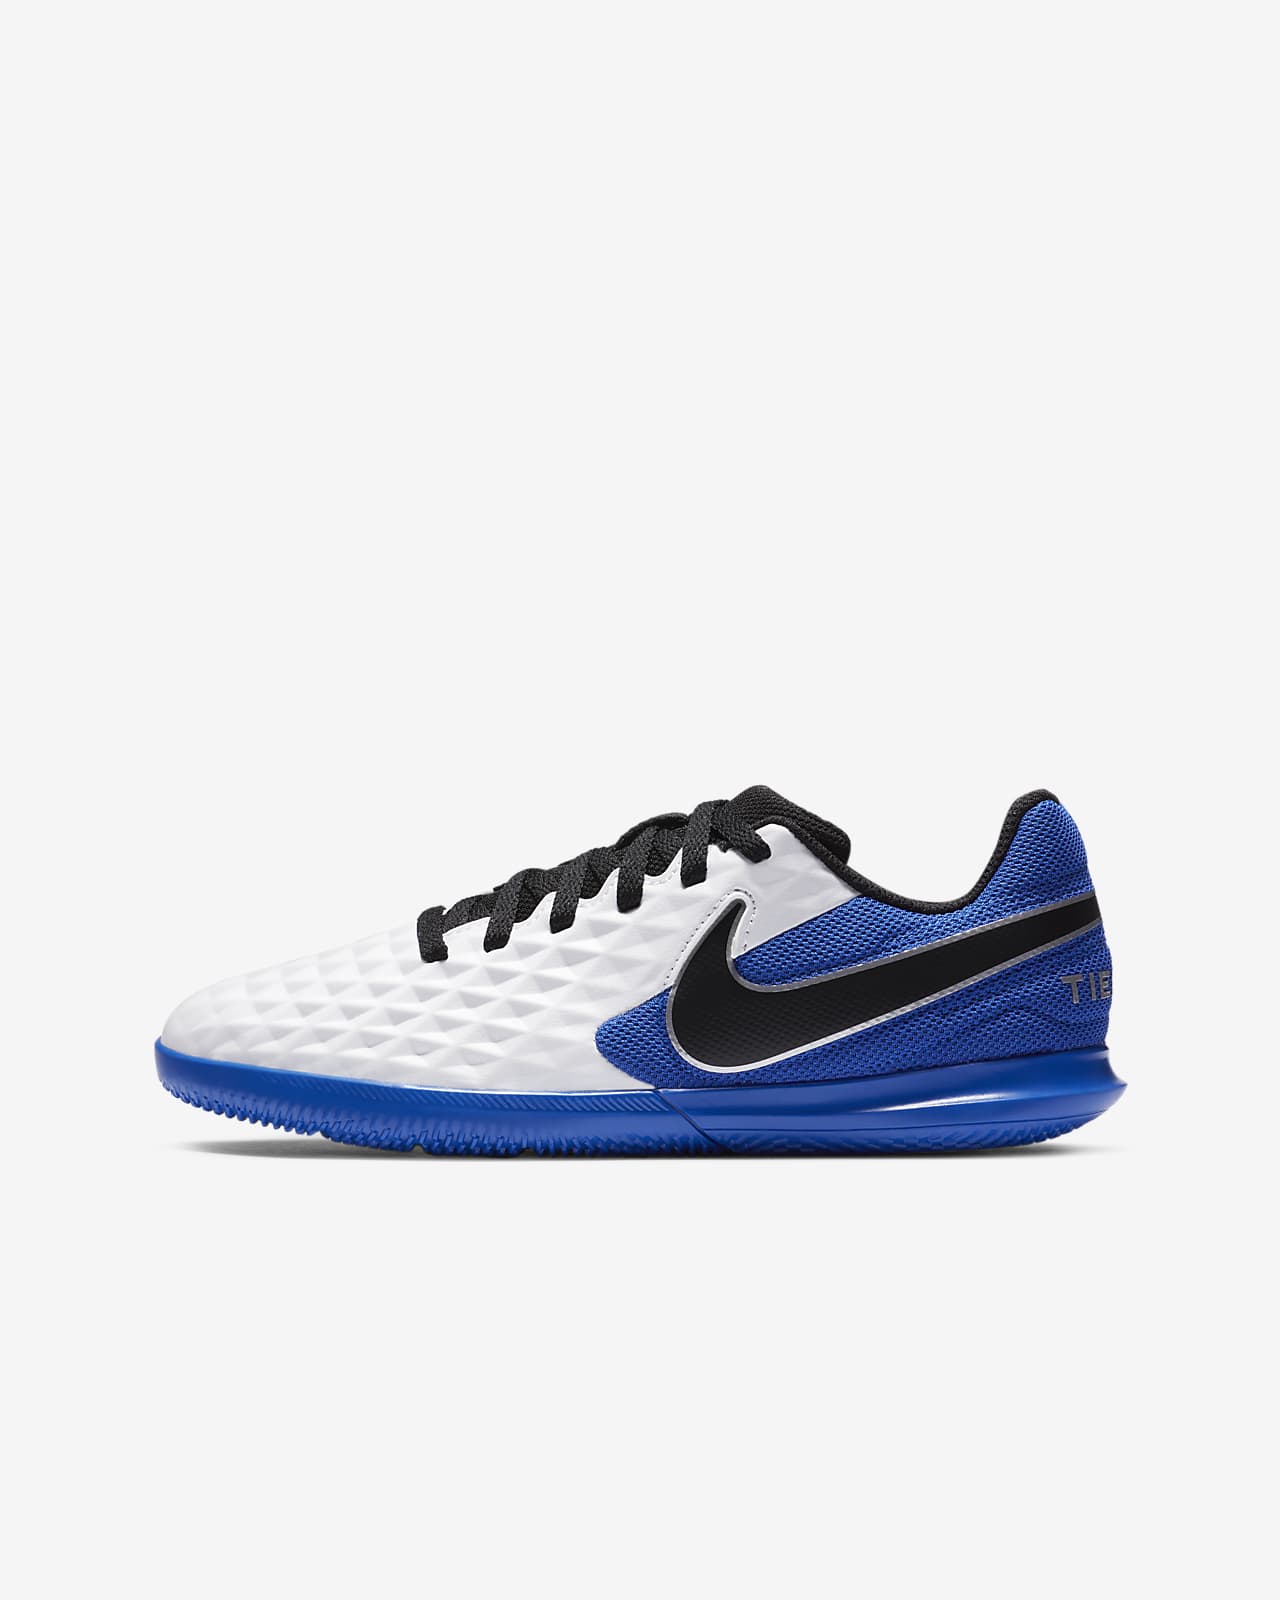 indoor soccer shoes nike